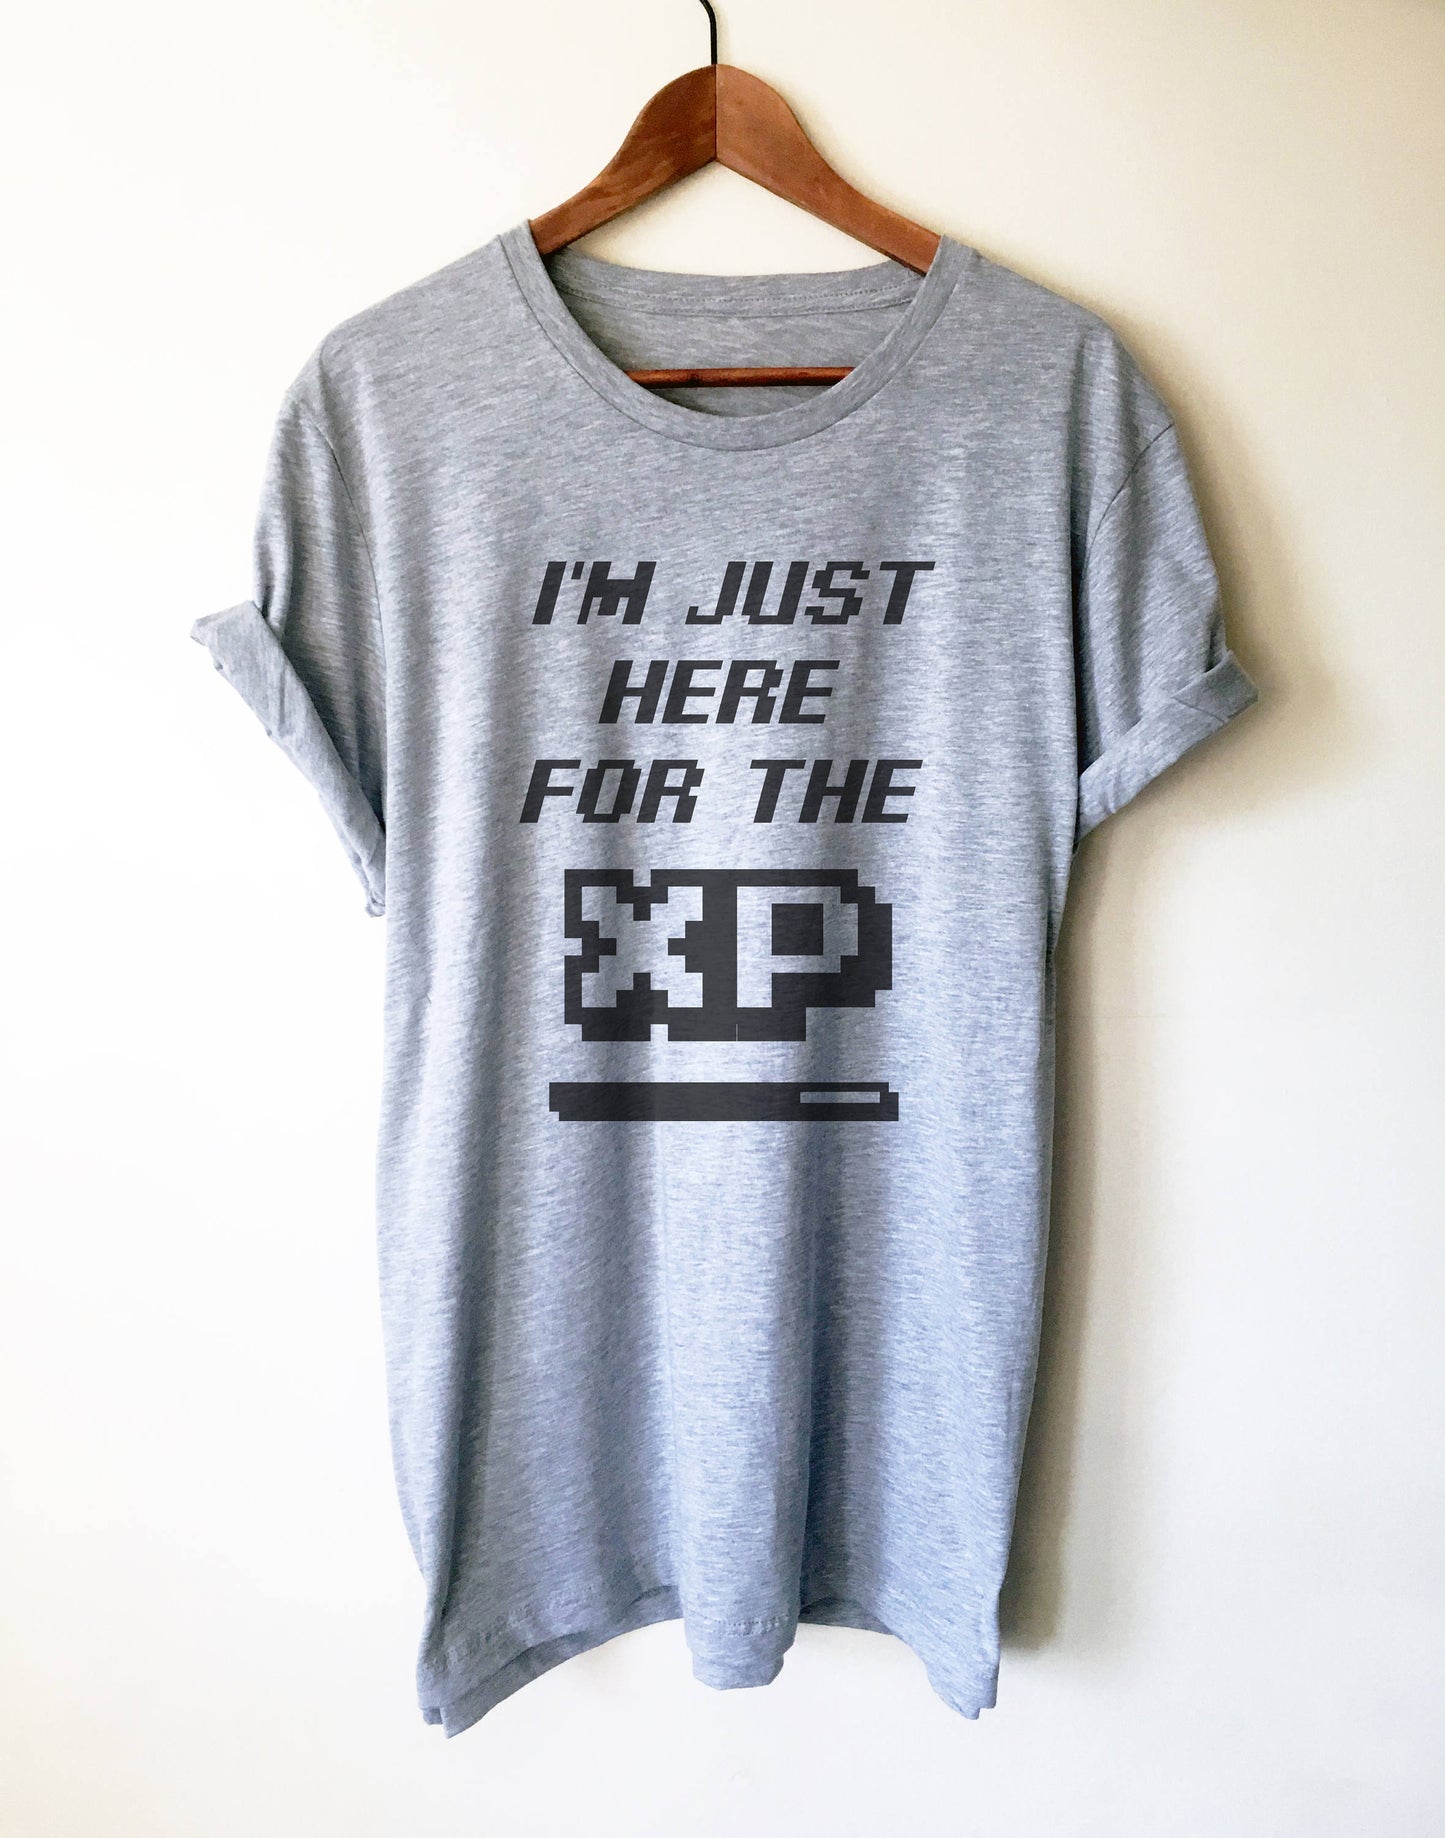 I'm Just Here For The XP Unisex T-Shirt - videogame gift - videogame tshirt - video game nerd gift - videogame tshirts - geeky gift